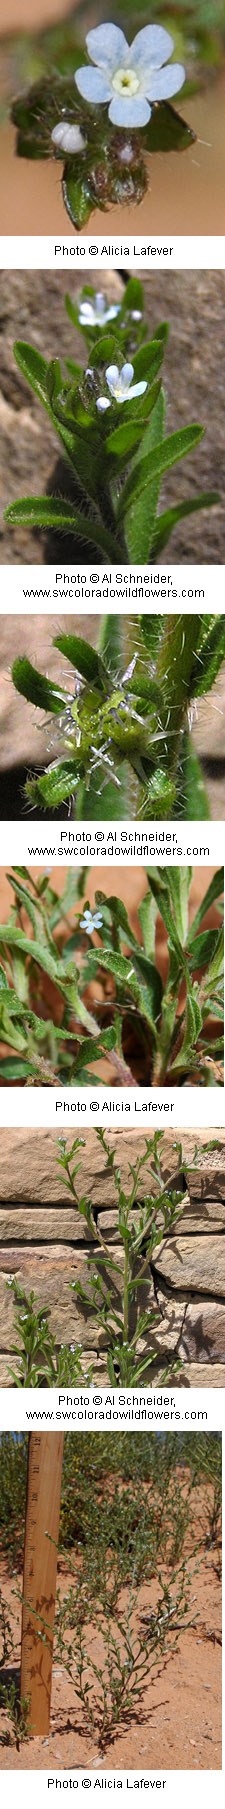 Multiple images of small white flowers with five rounded petals with hairy pointed leaves.